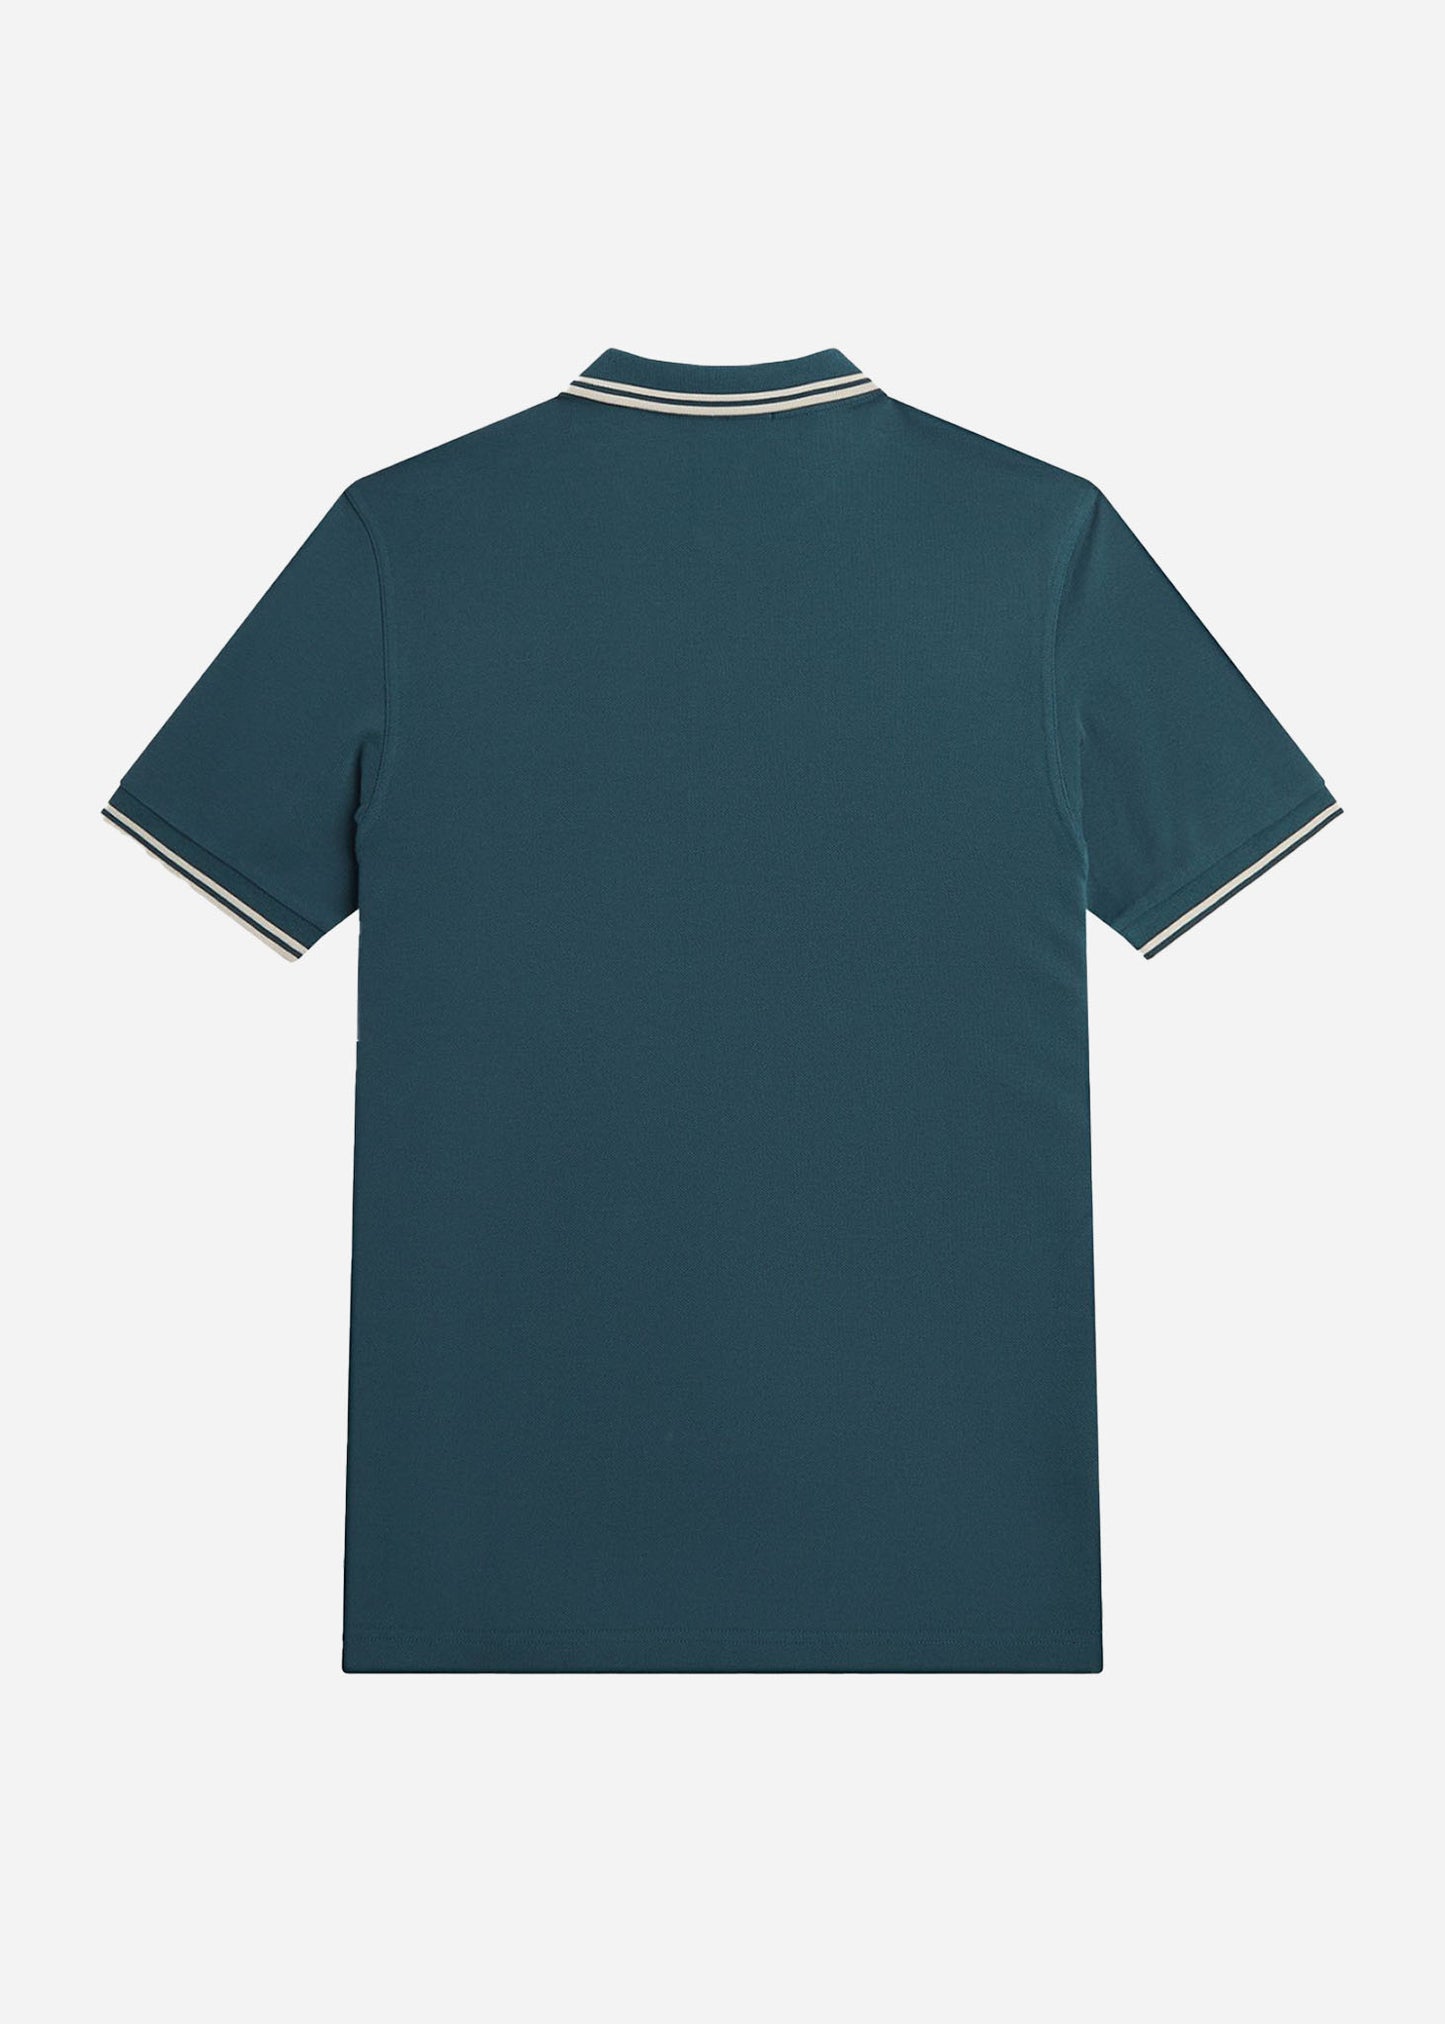 Twin tipped fred perry shirt - petrol blue